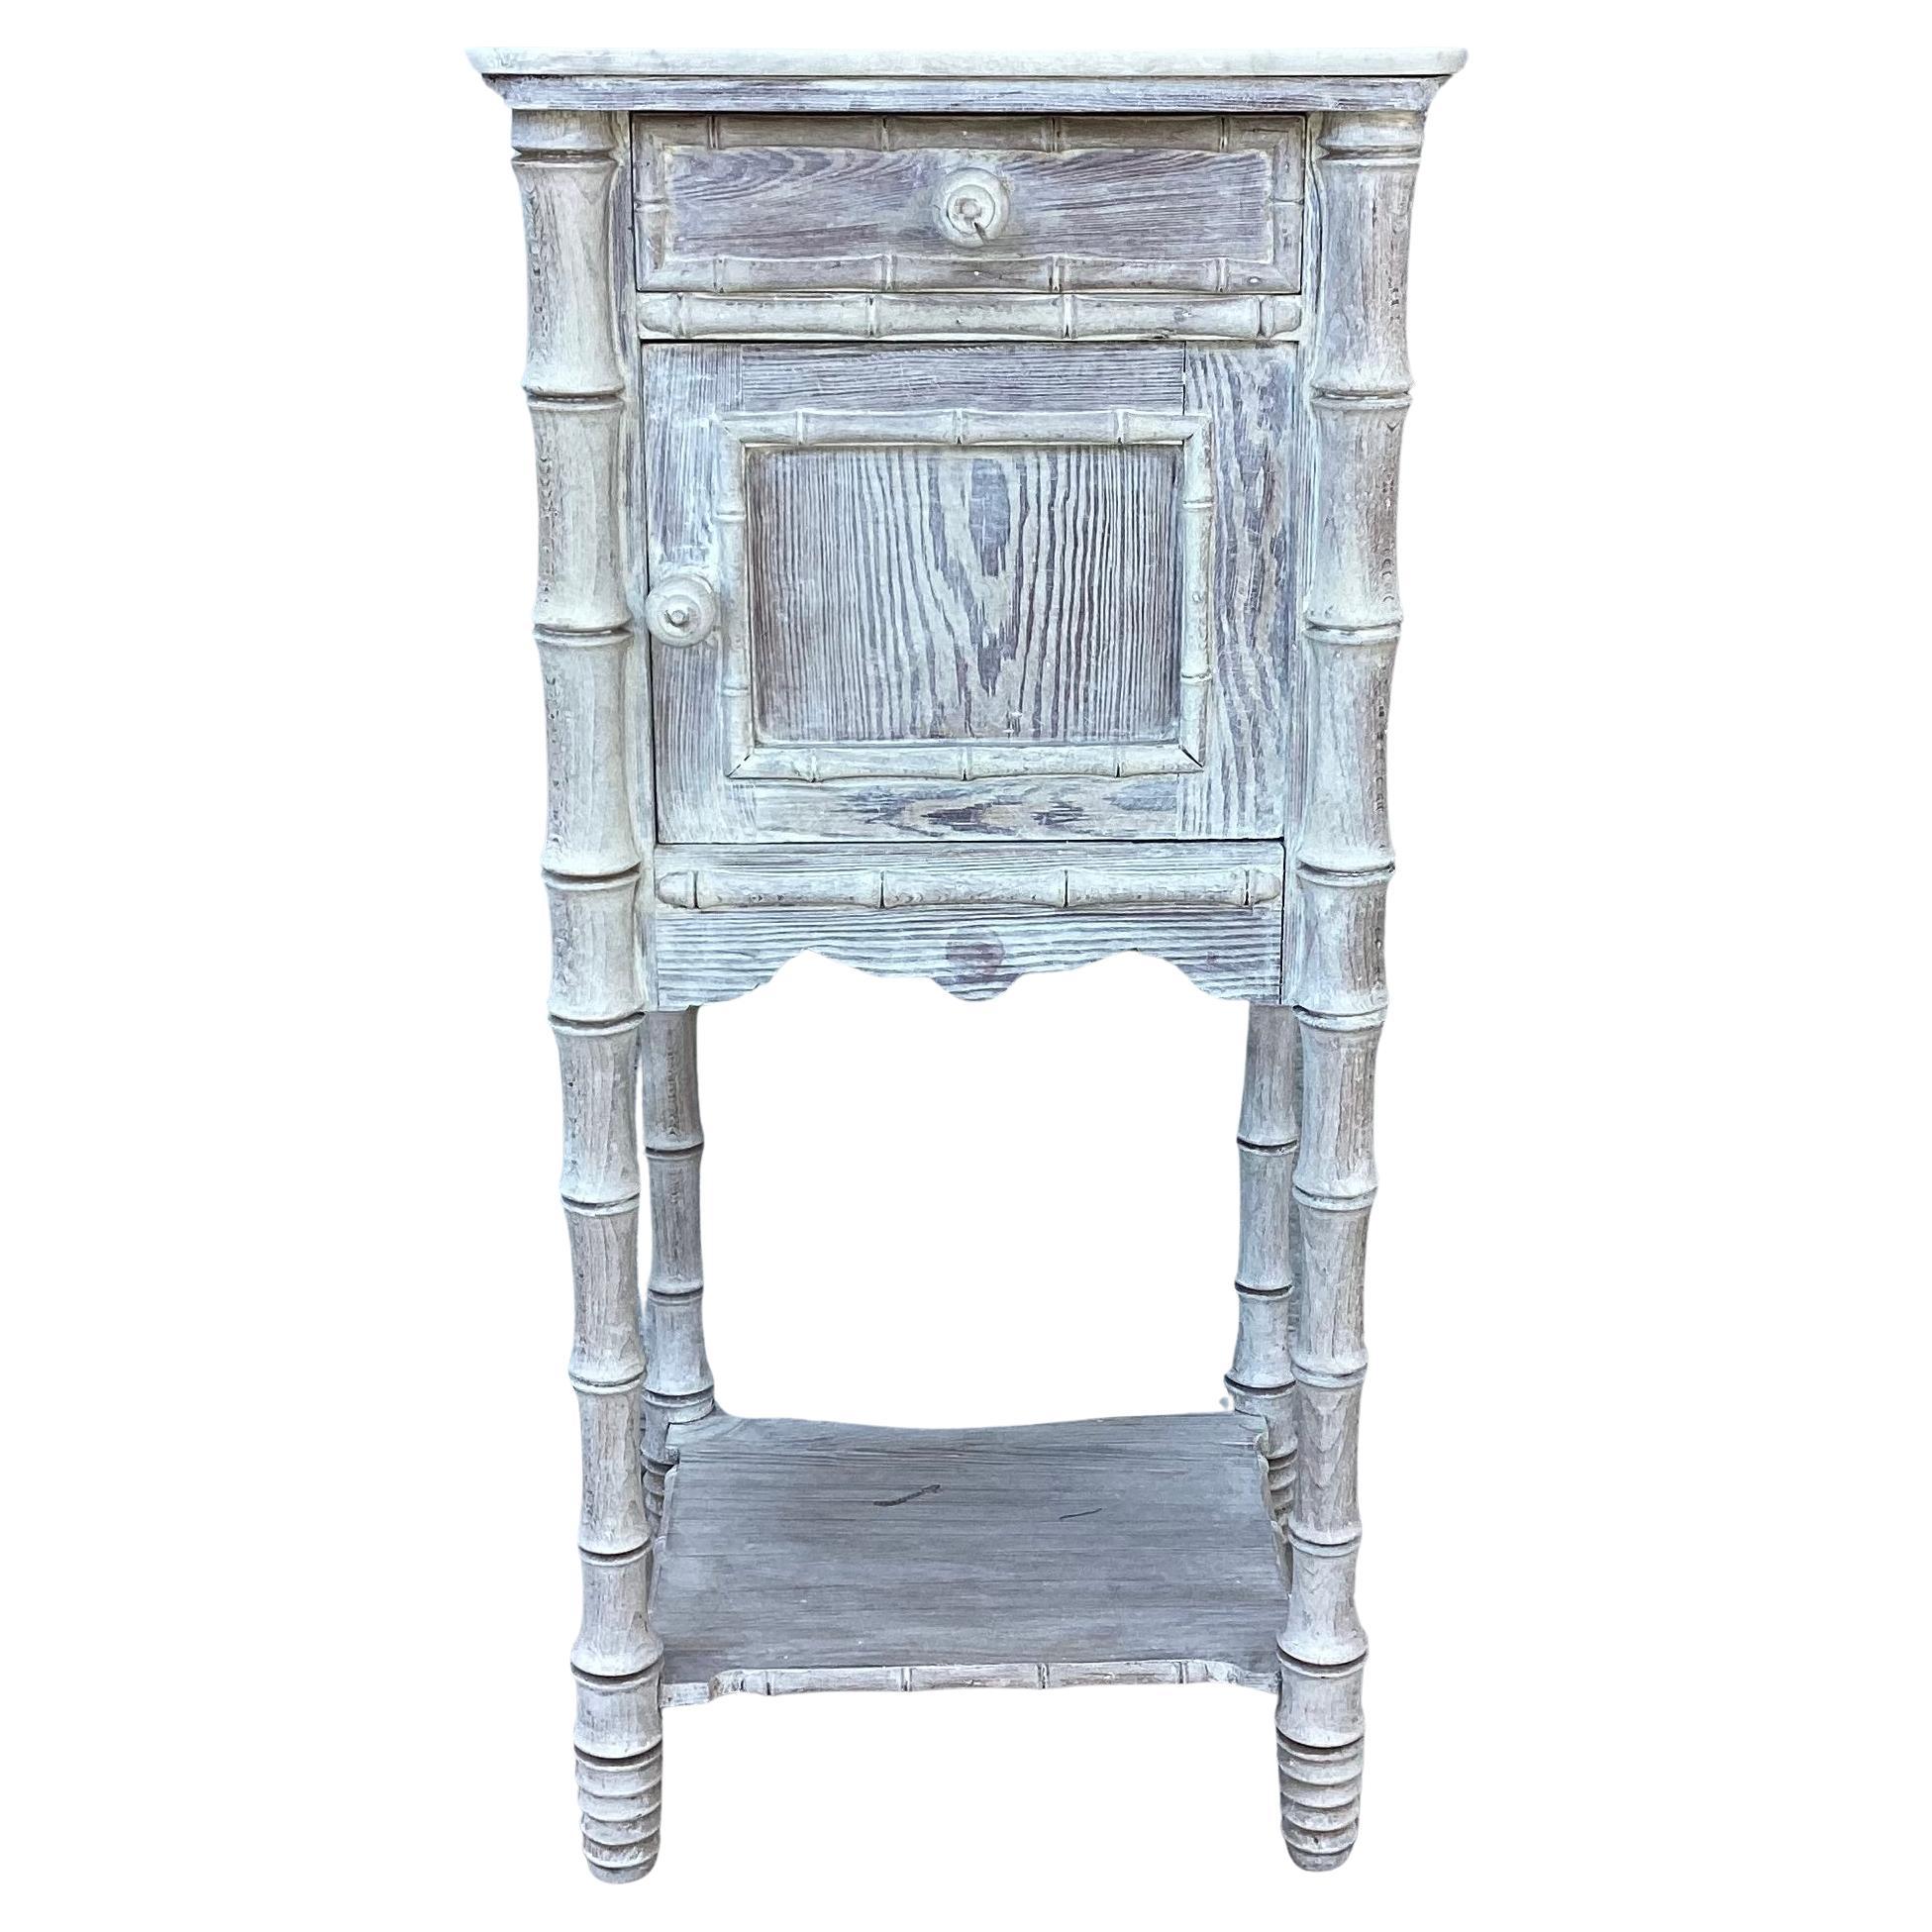 Charming vintage faux bamboo nightstand or side table with brown marble top. Table features a top drawer and a bottom shelf with door opening, and four turned post legs for support. Has a distressed finish for a well-worn patina to add to the charm. 